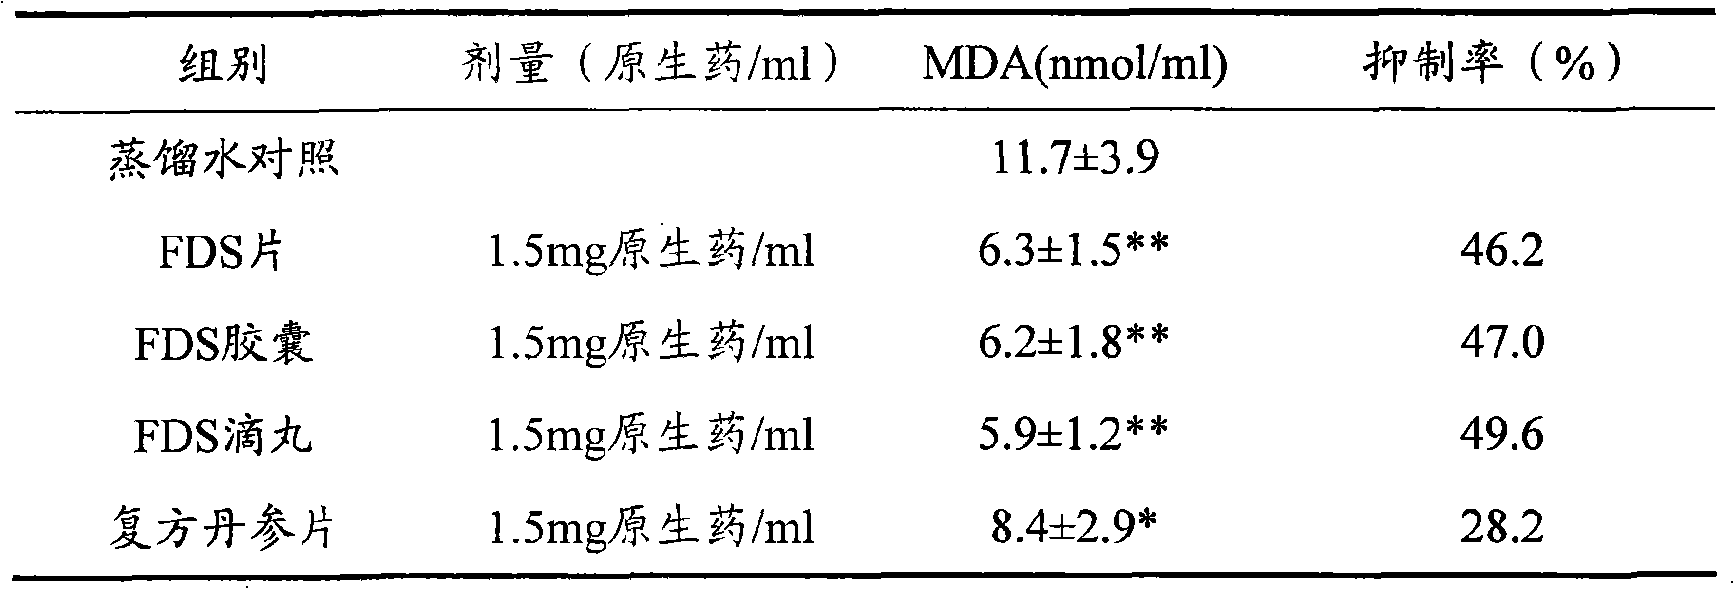 Method for preparing Chinese traditional medicinal compound salvia miltiorrhiza preparation for curing cardiovascular and cerebrovascular diseases